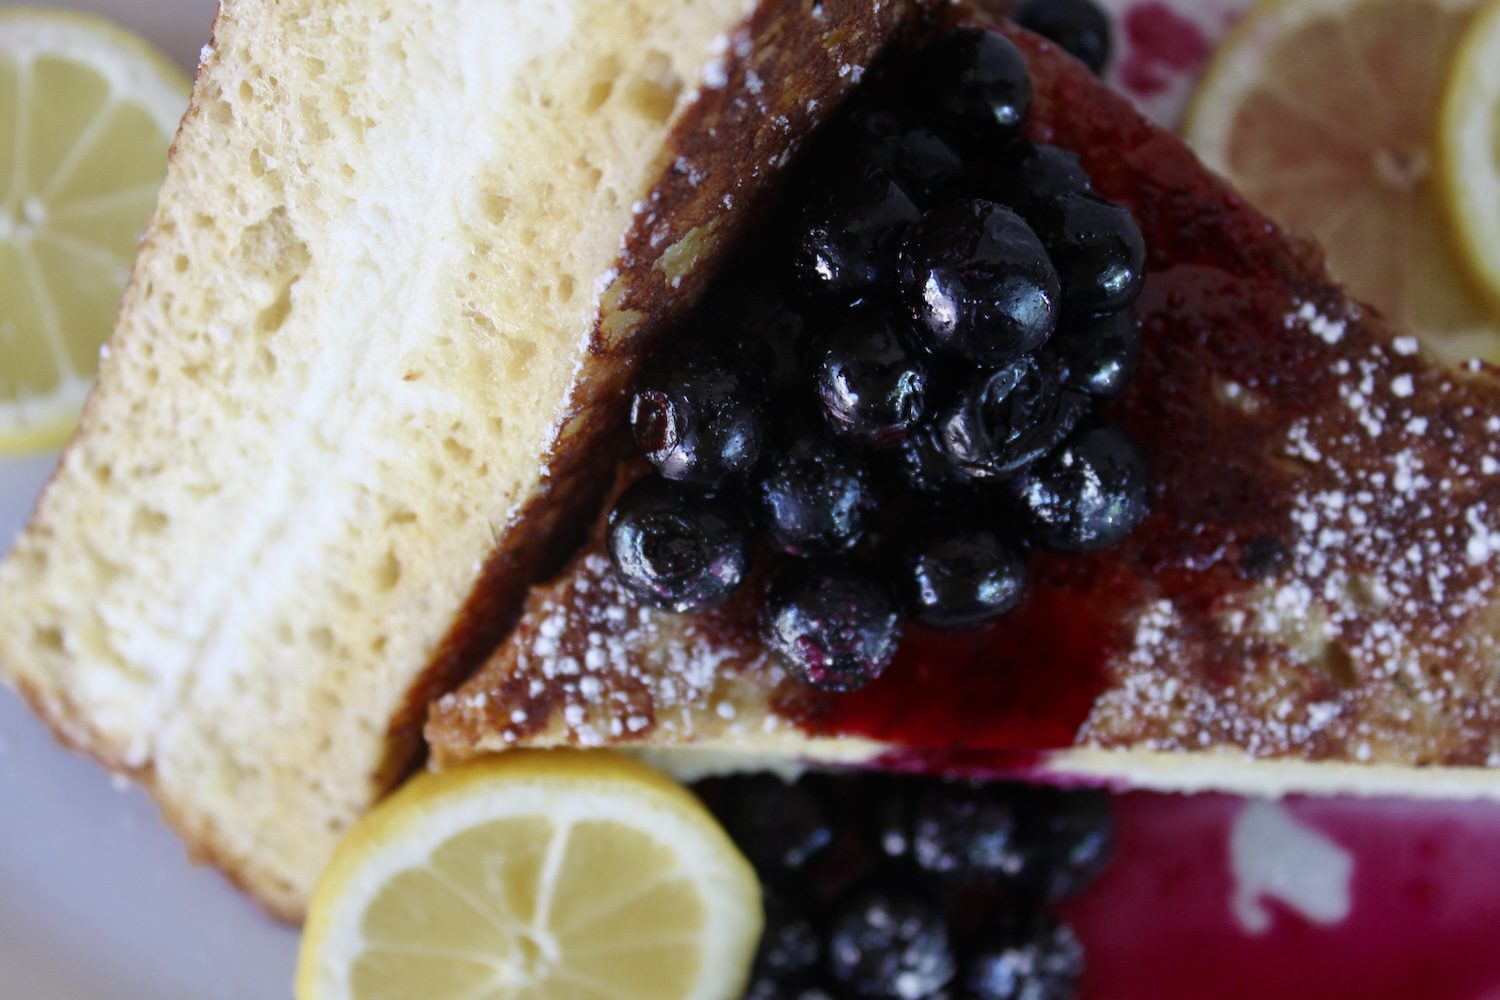 Lemon Ricotta Stuffed French Toast with Blueberry topping